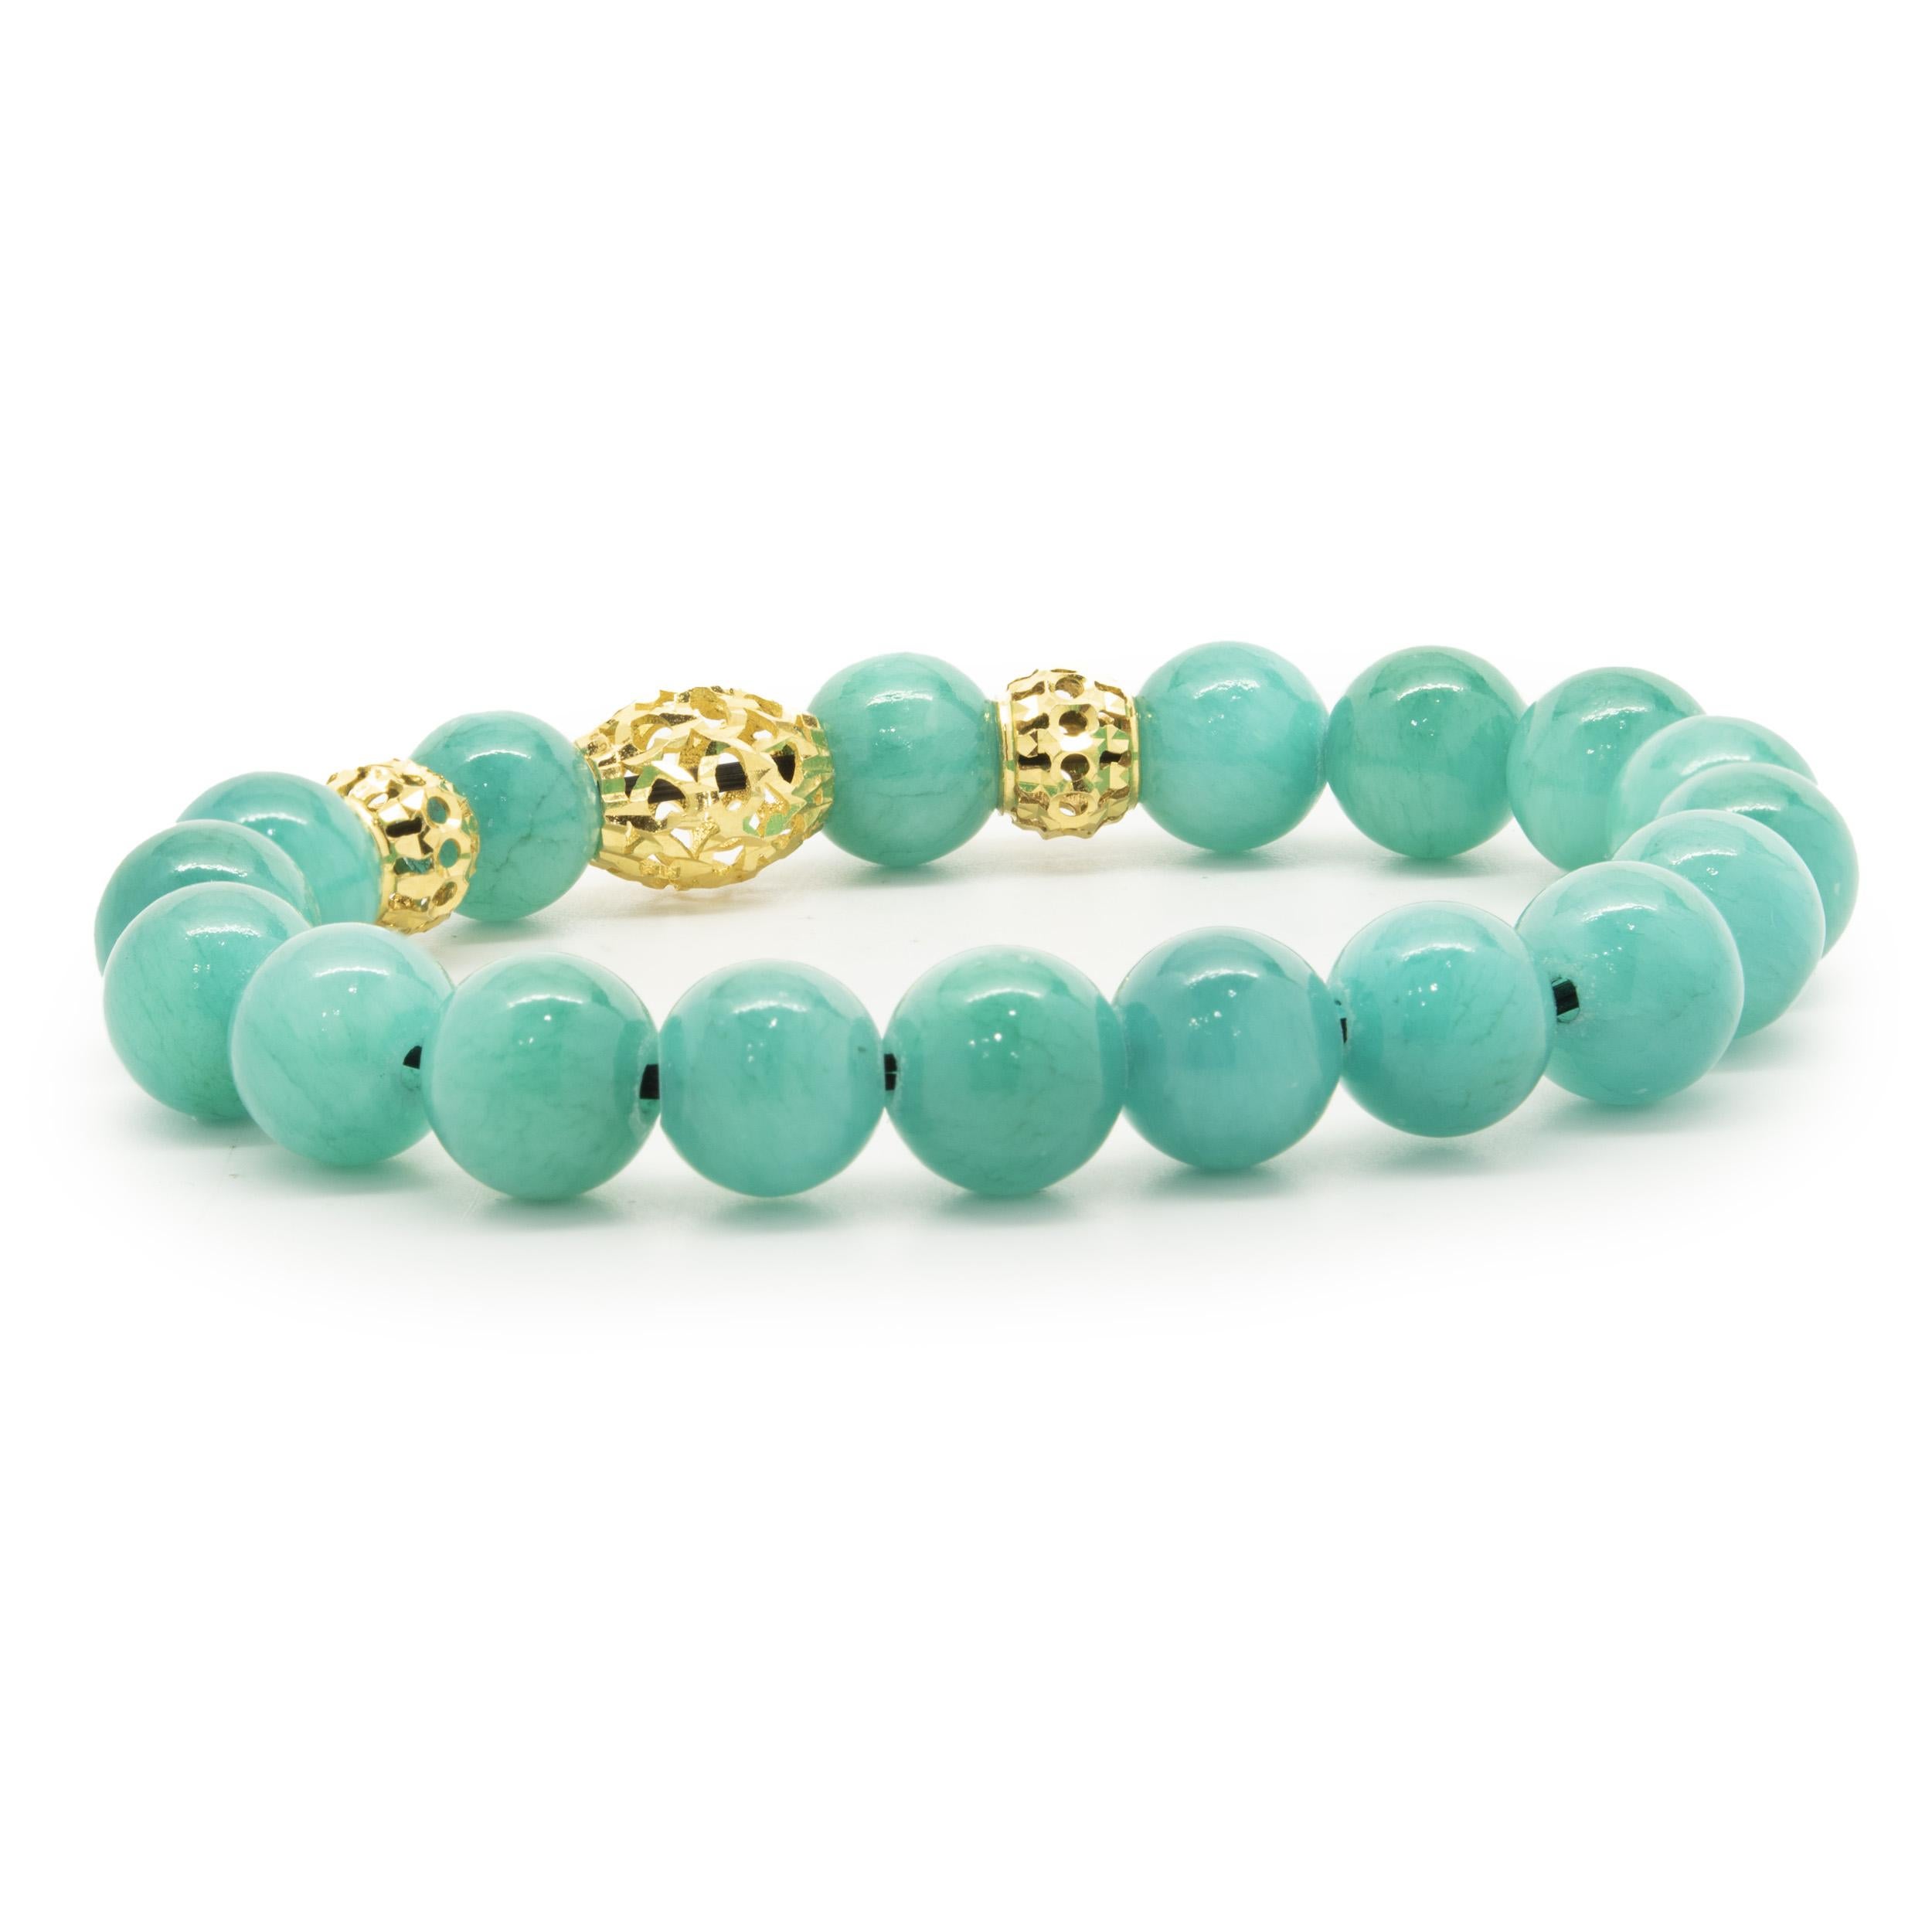 18 Karat Yellow Gold Turquoise Beaded Bracelet In Excellent Condition For Sale In Scottsdale, AZ